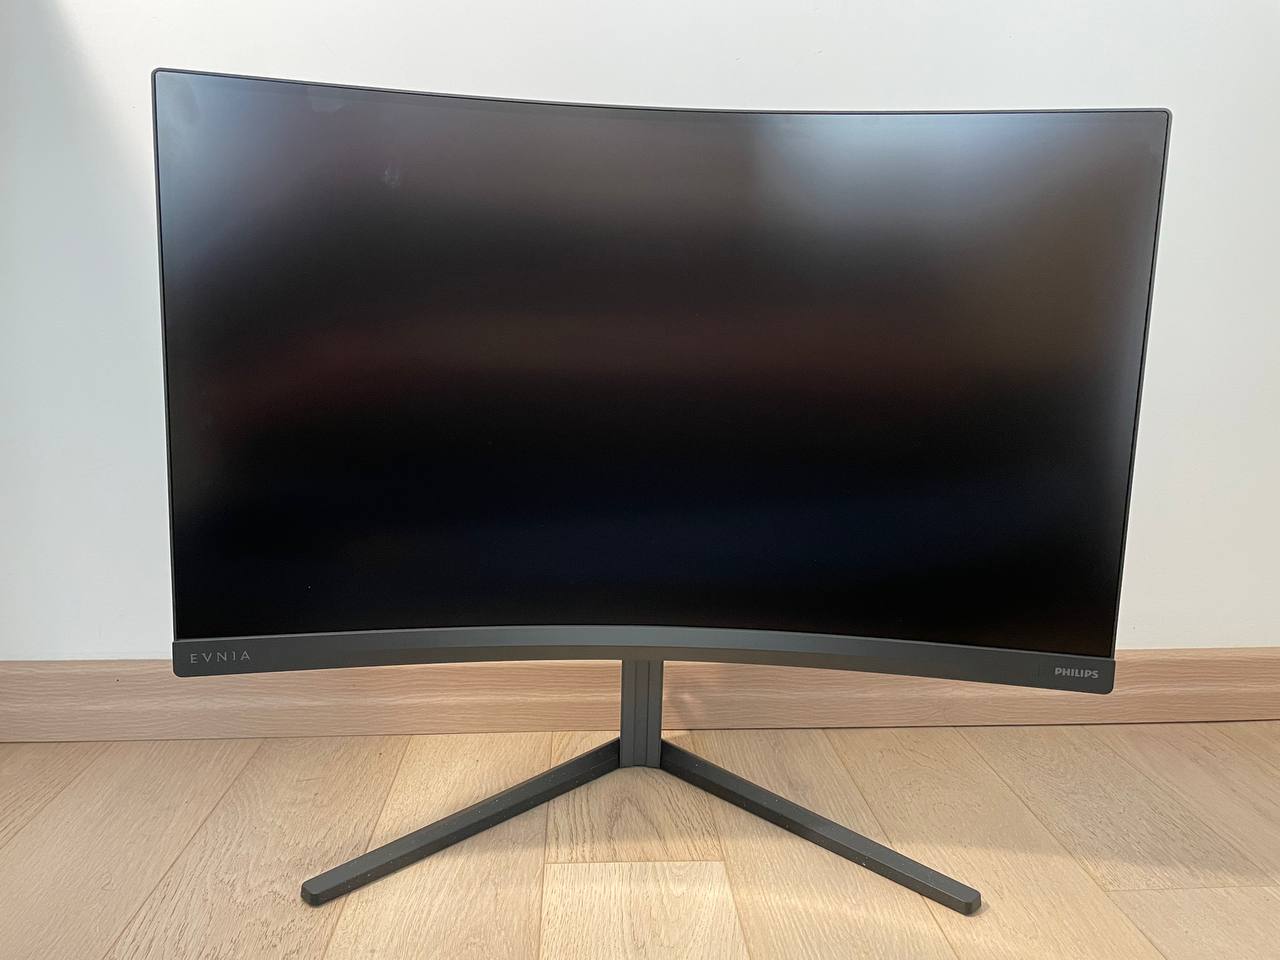 Philip Evnia 27M2C5500W review: a 2K monitor with a high refresh rate